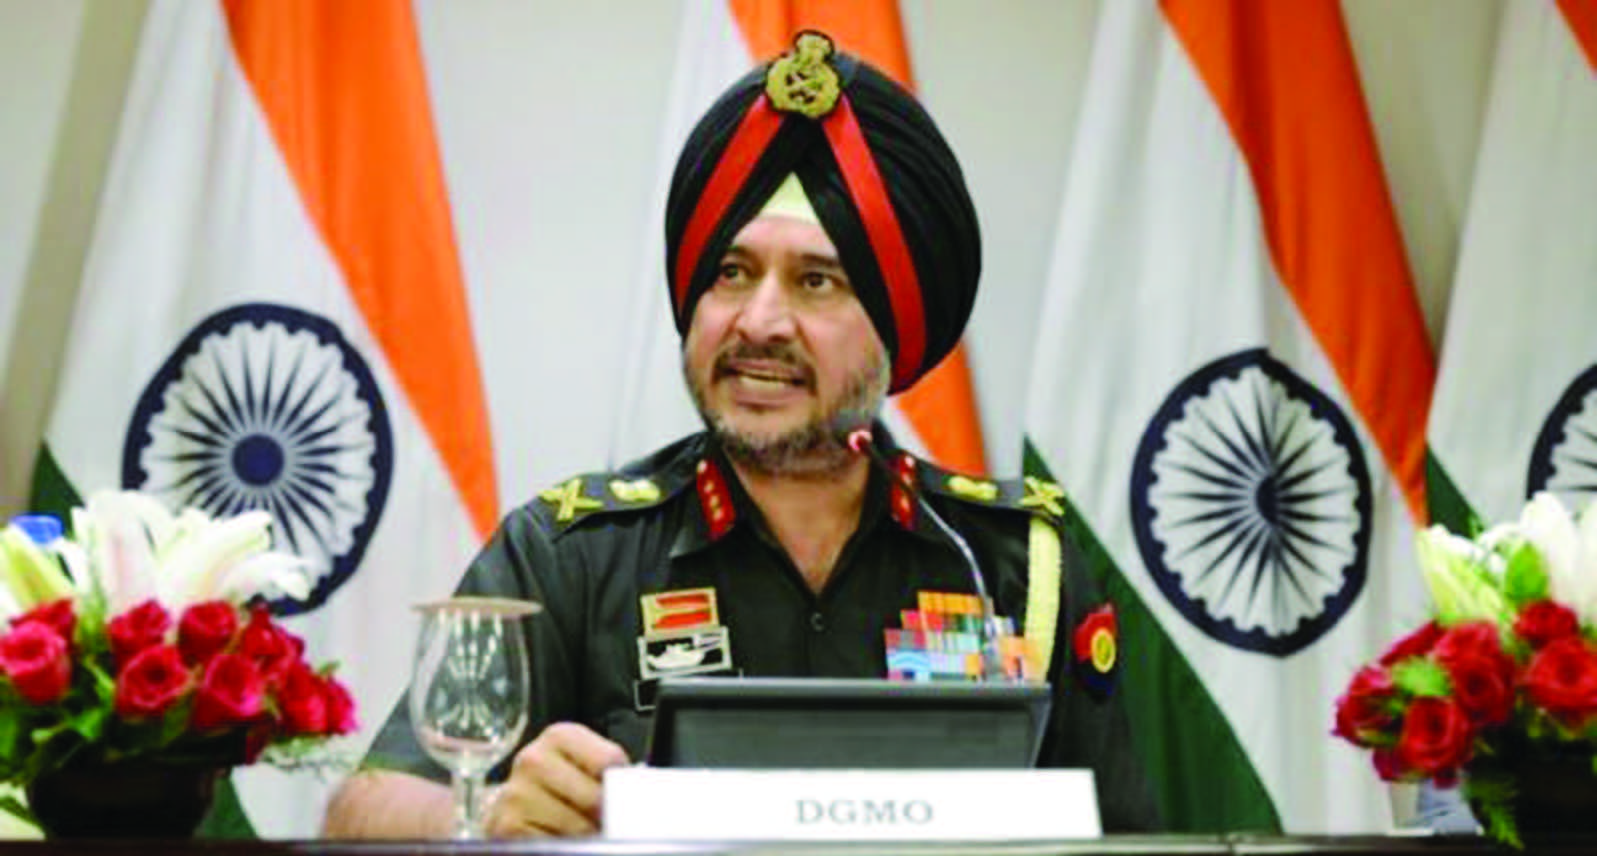 India's Director General of Military Operations, Lt Gen Ranbir Singh, in his briefing claimed that "significant casualties have been caused to the terrorists and those who are trying to support them". Photo courtesy of PTI